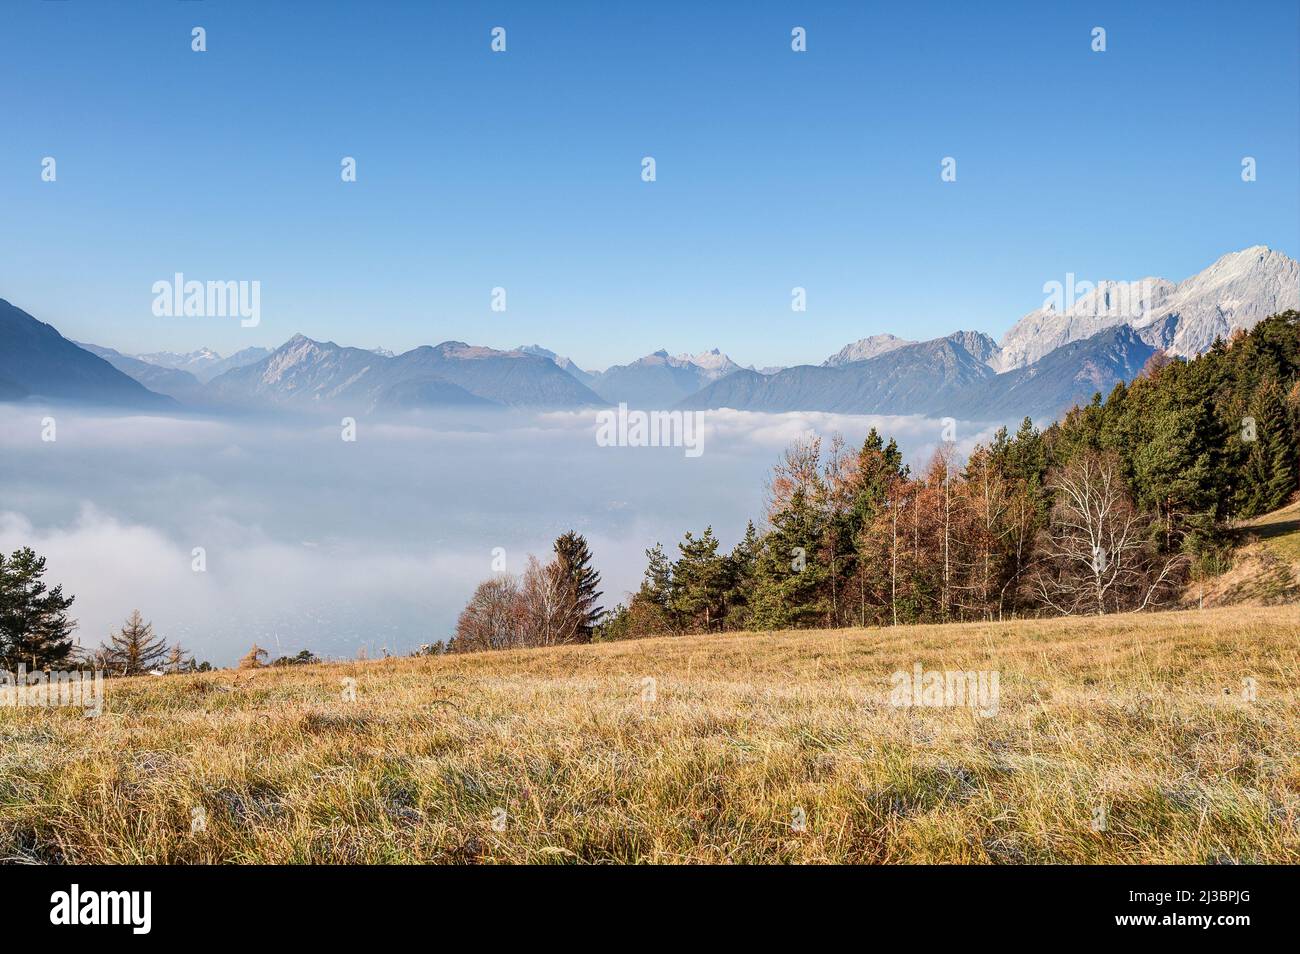 Hidden under the fog lies the town of Telfs in Tyrol, directly at the entrance to the Oberinntal. Stock Photo